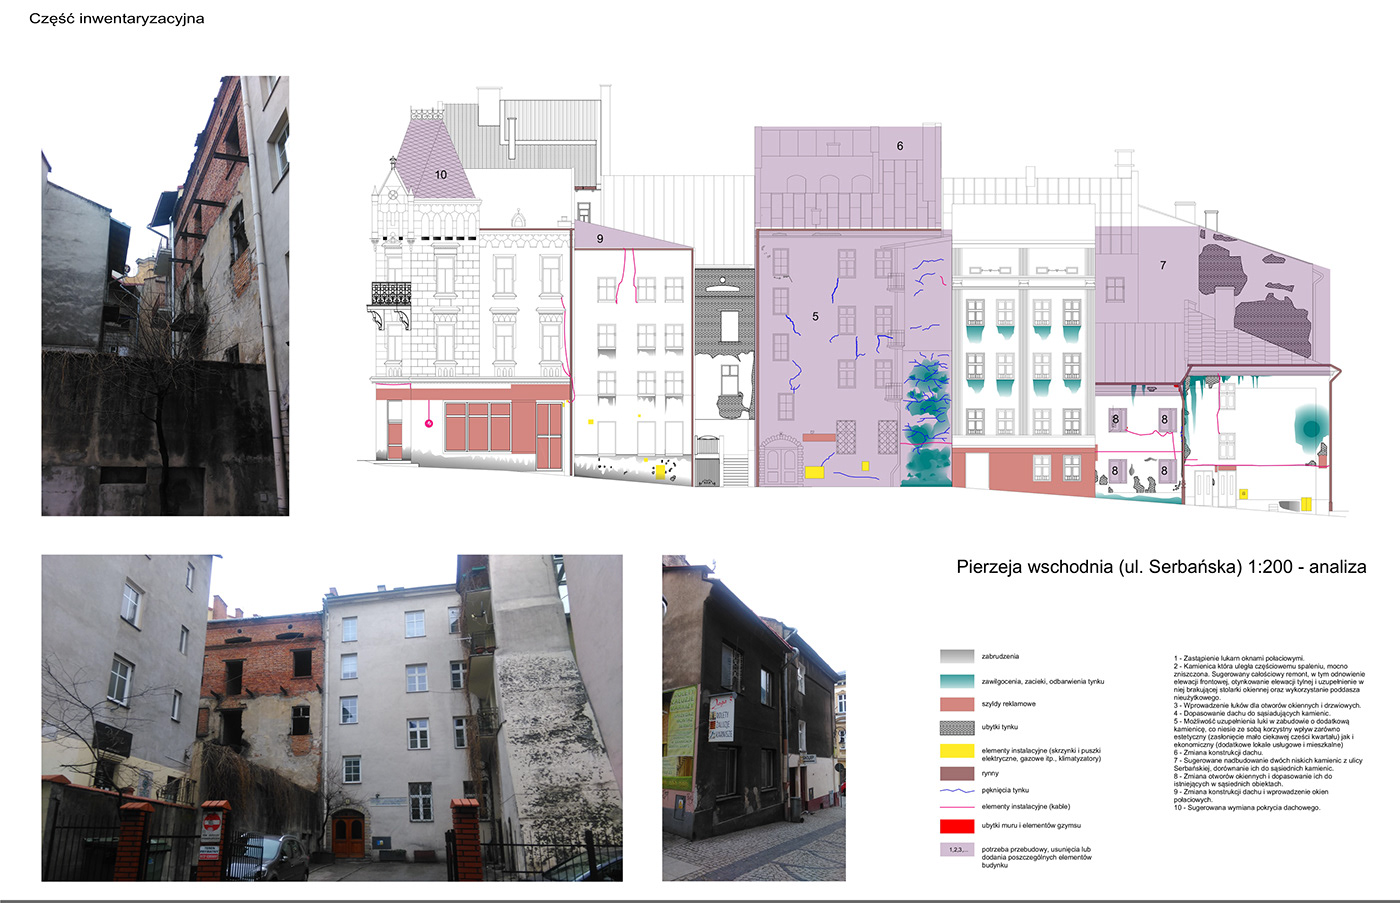 revitalization historical architecture Analysis market downtown tenement house Urban Infill